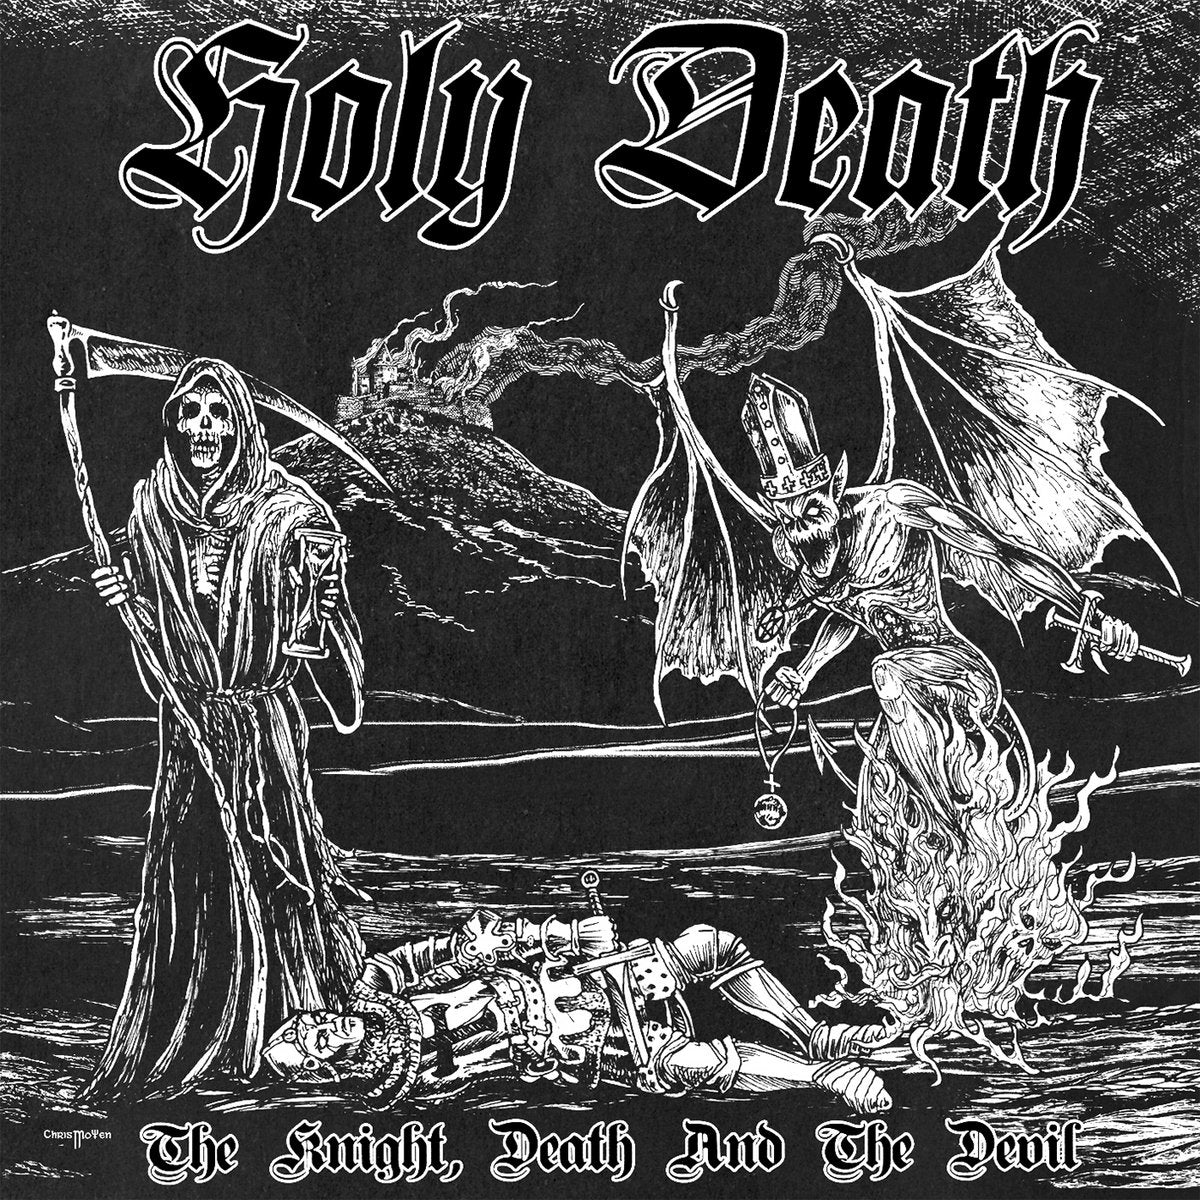 Holy Death - The Knight, Death And The Devil DCD